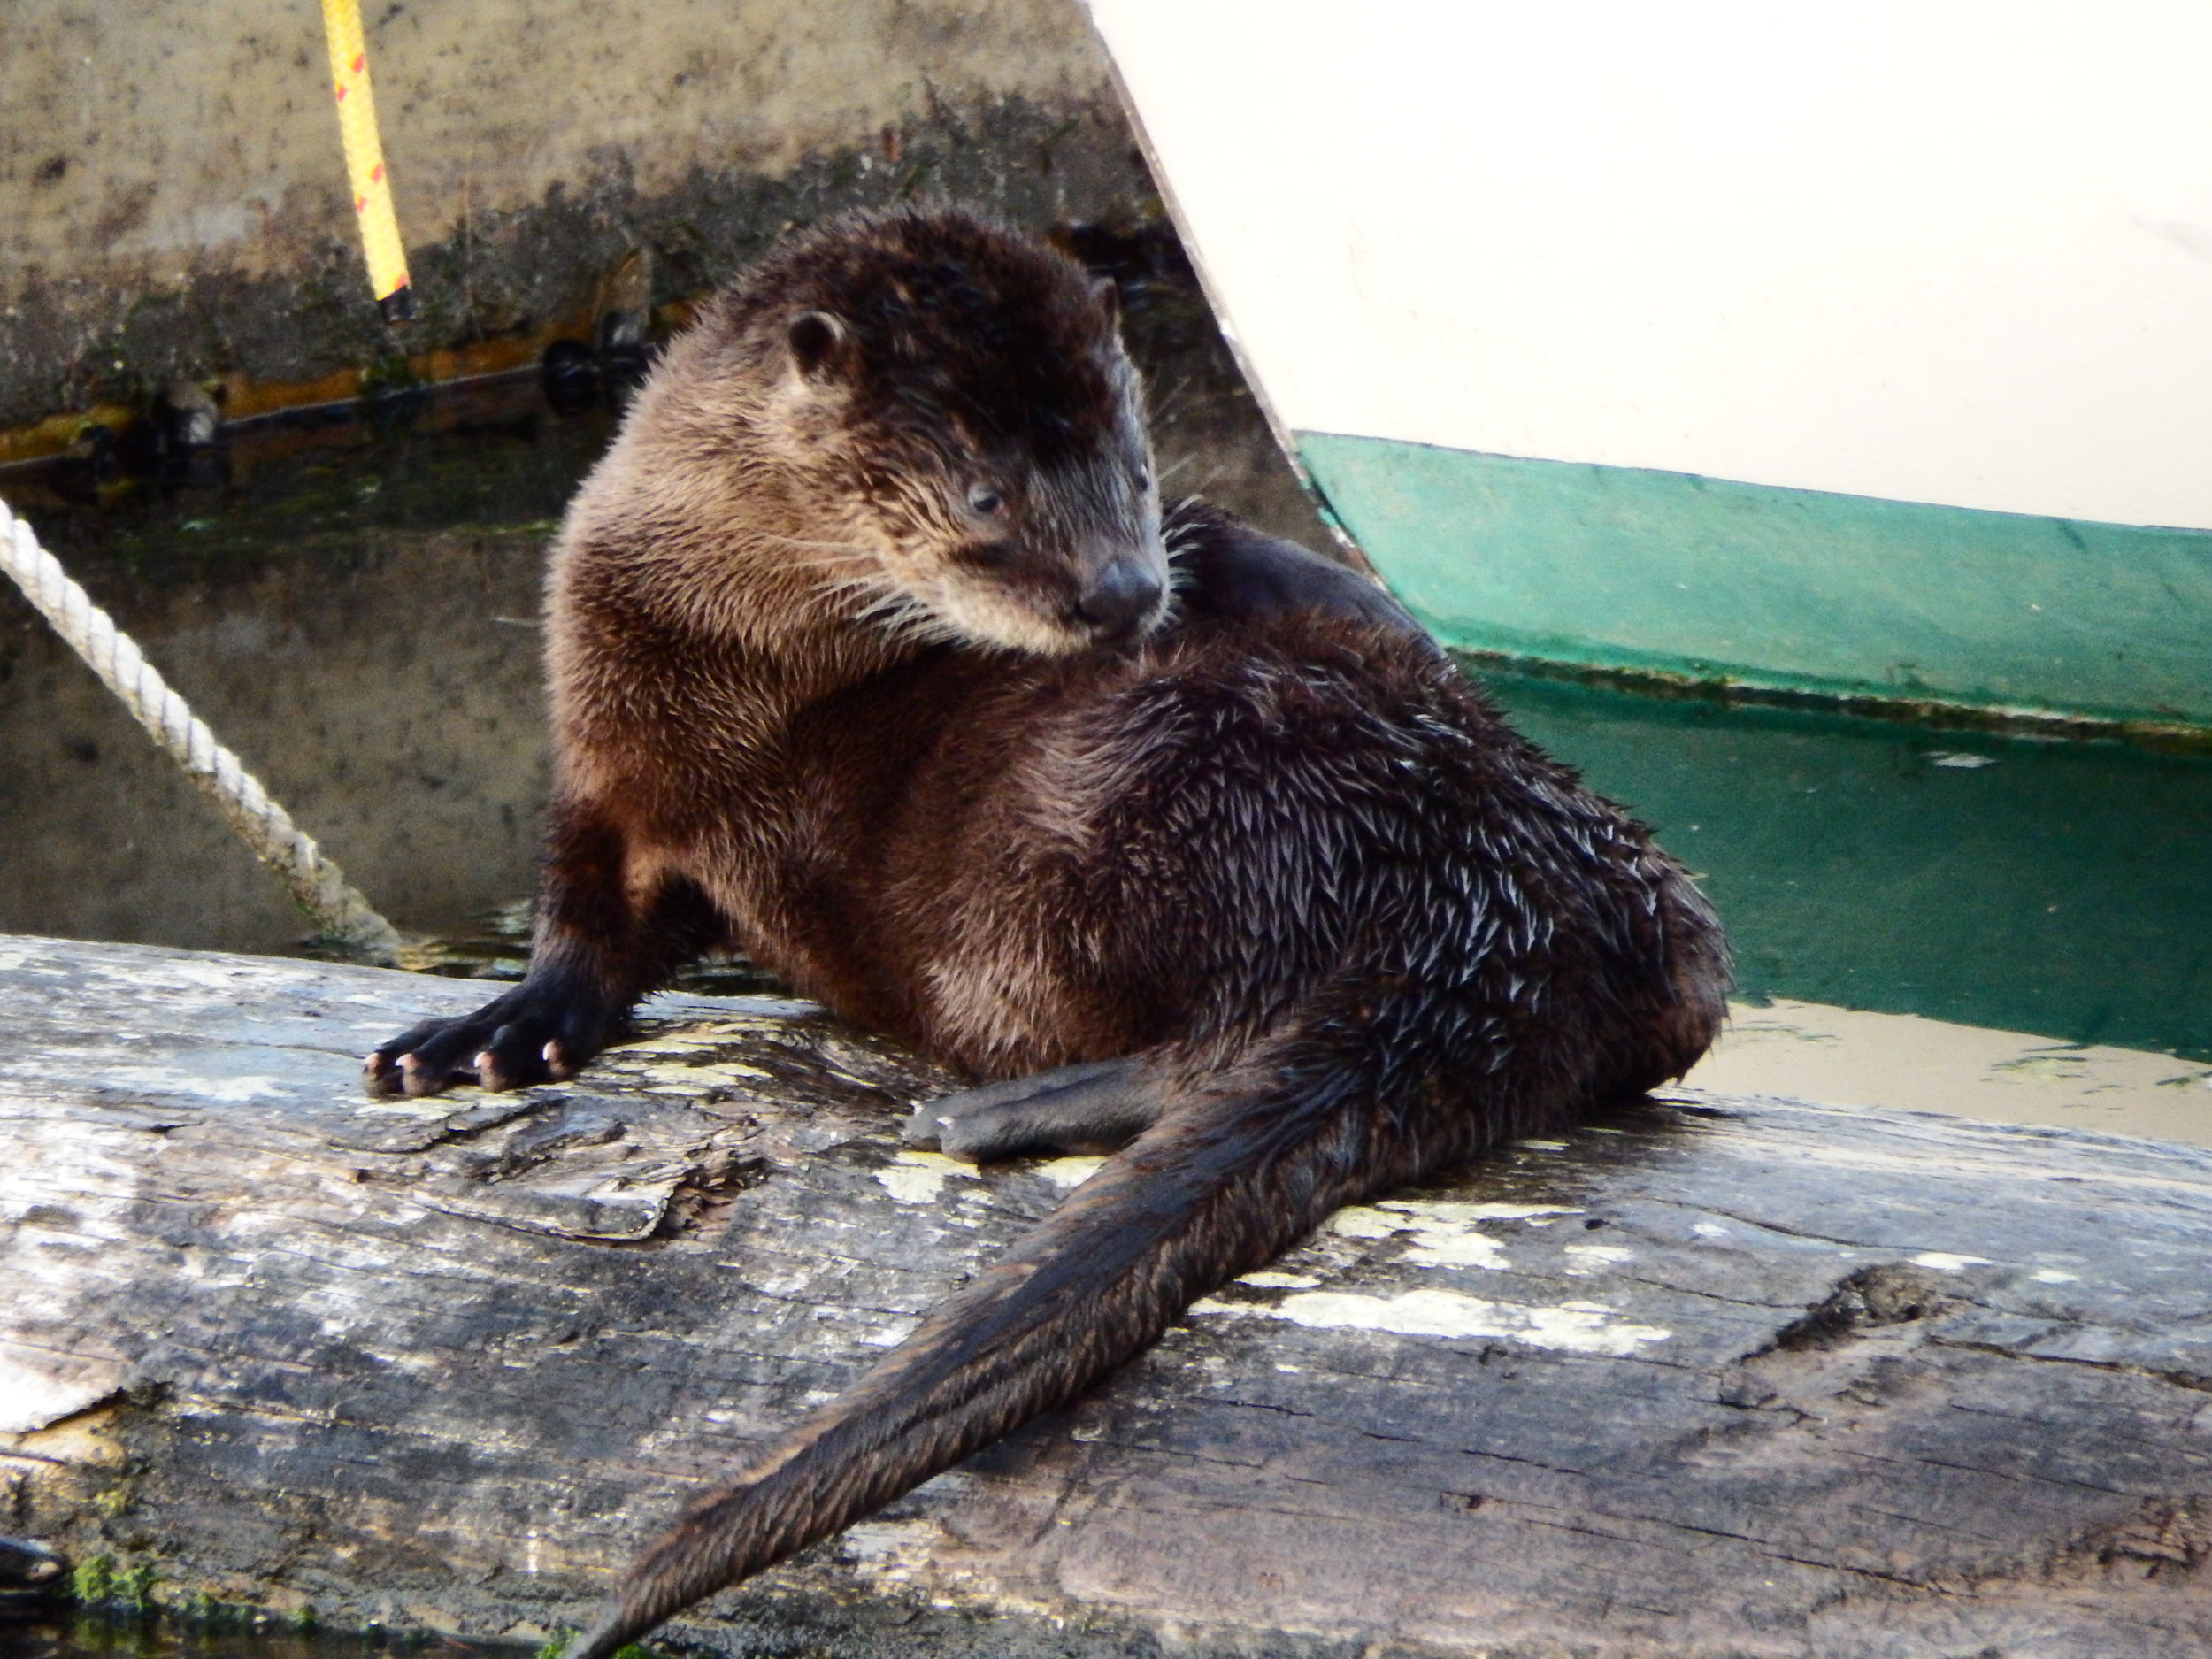 Is Otter About to Have a Great Scratch or Is His Fur Just That Interesting?